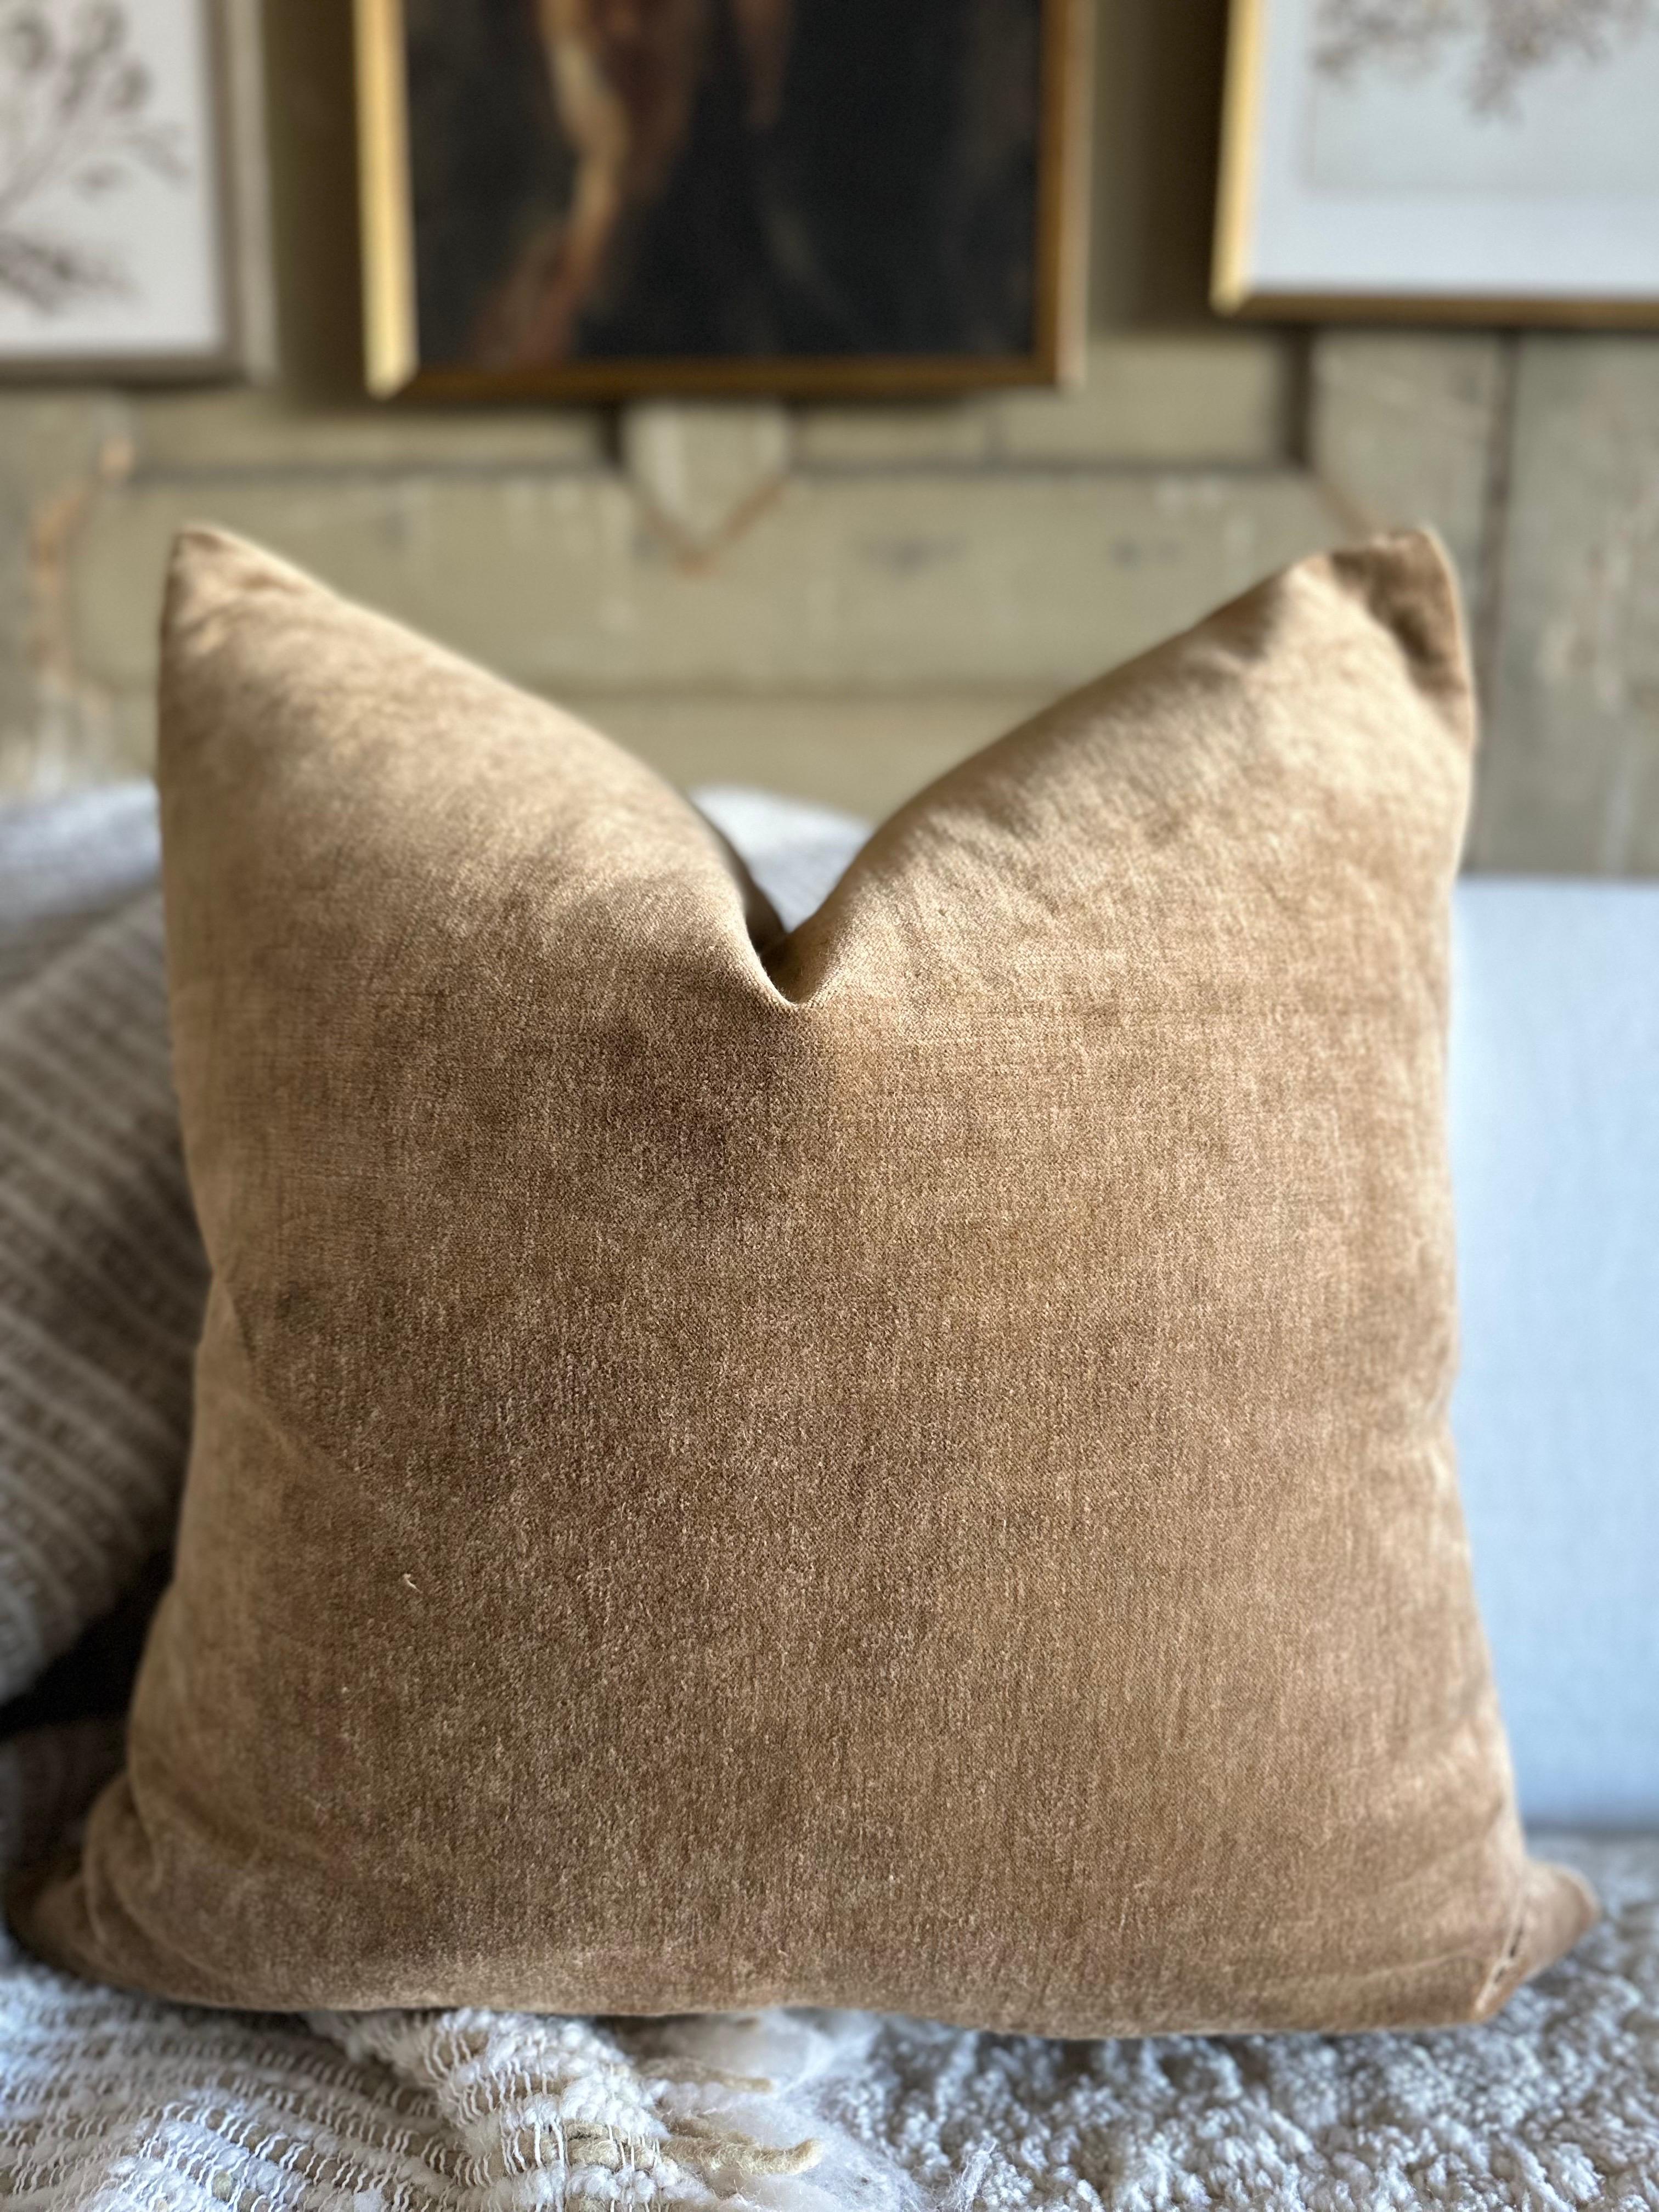 A luxurious Royal Velvet face with stone washed linen back.
Linen & Velvet fabric is imported from France.
Custom made to order, can be customized to your size.
Color: Havane (a rich copper brown)
Antique brass zipper
Size 22x22
Includes Down